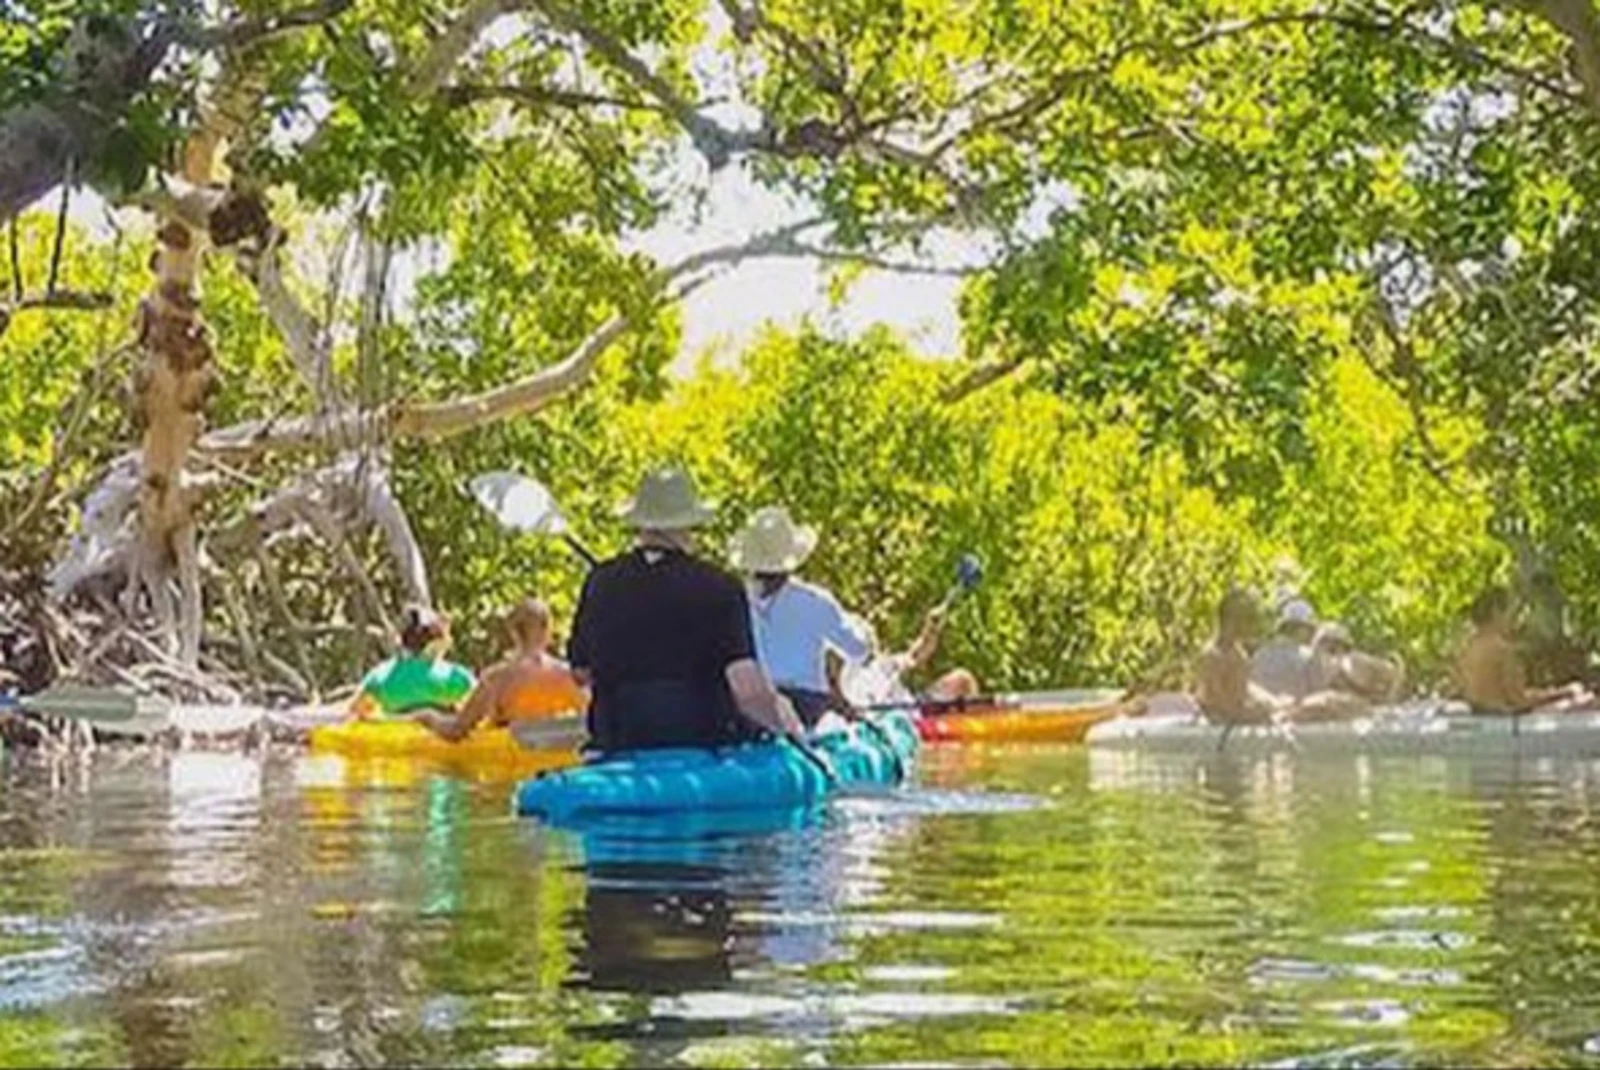 Eco-kayaking in the mangroves is one of the attractions in Key West.